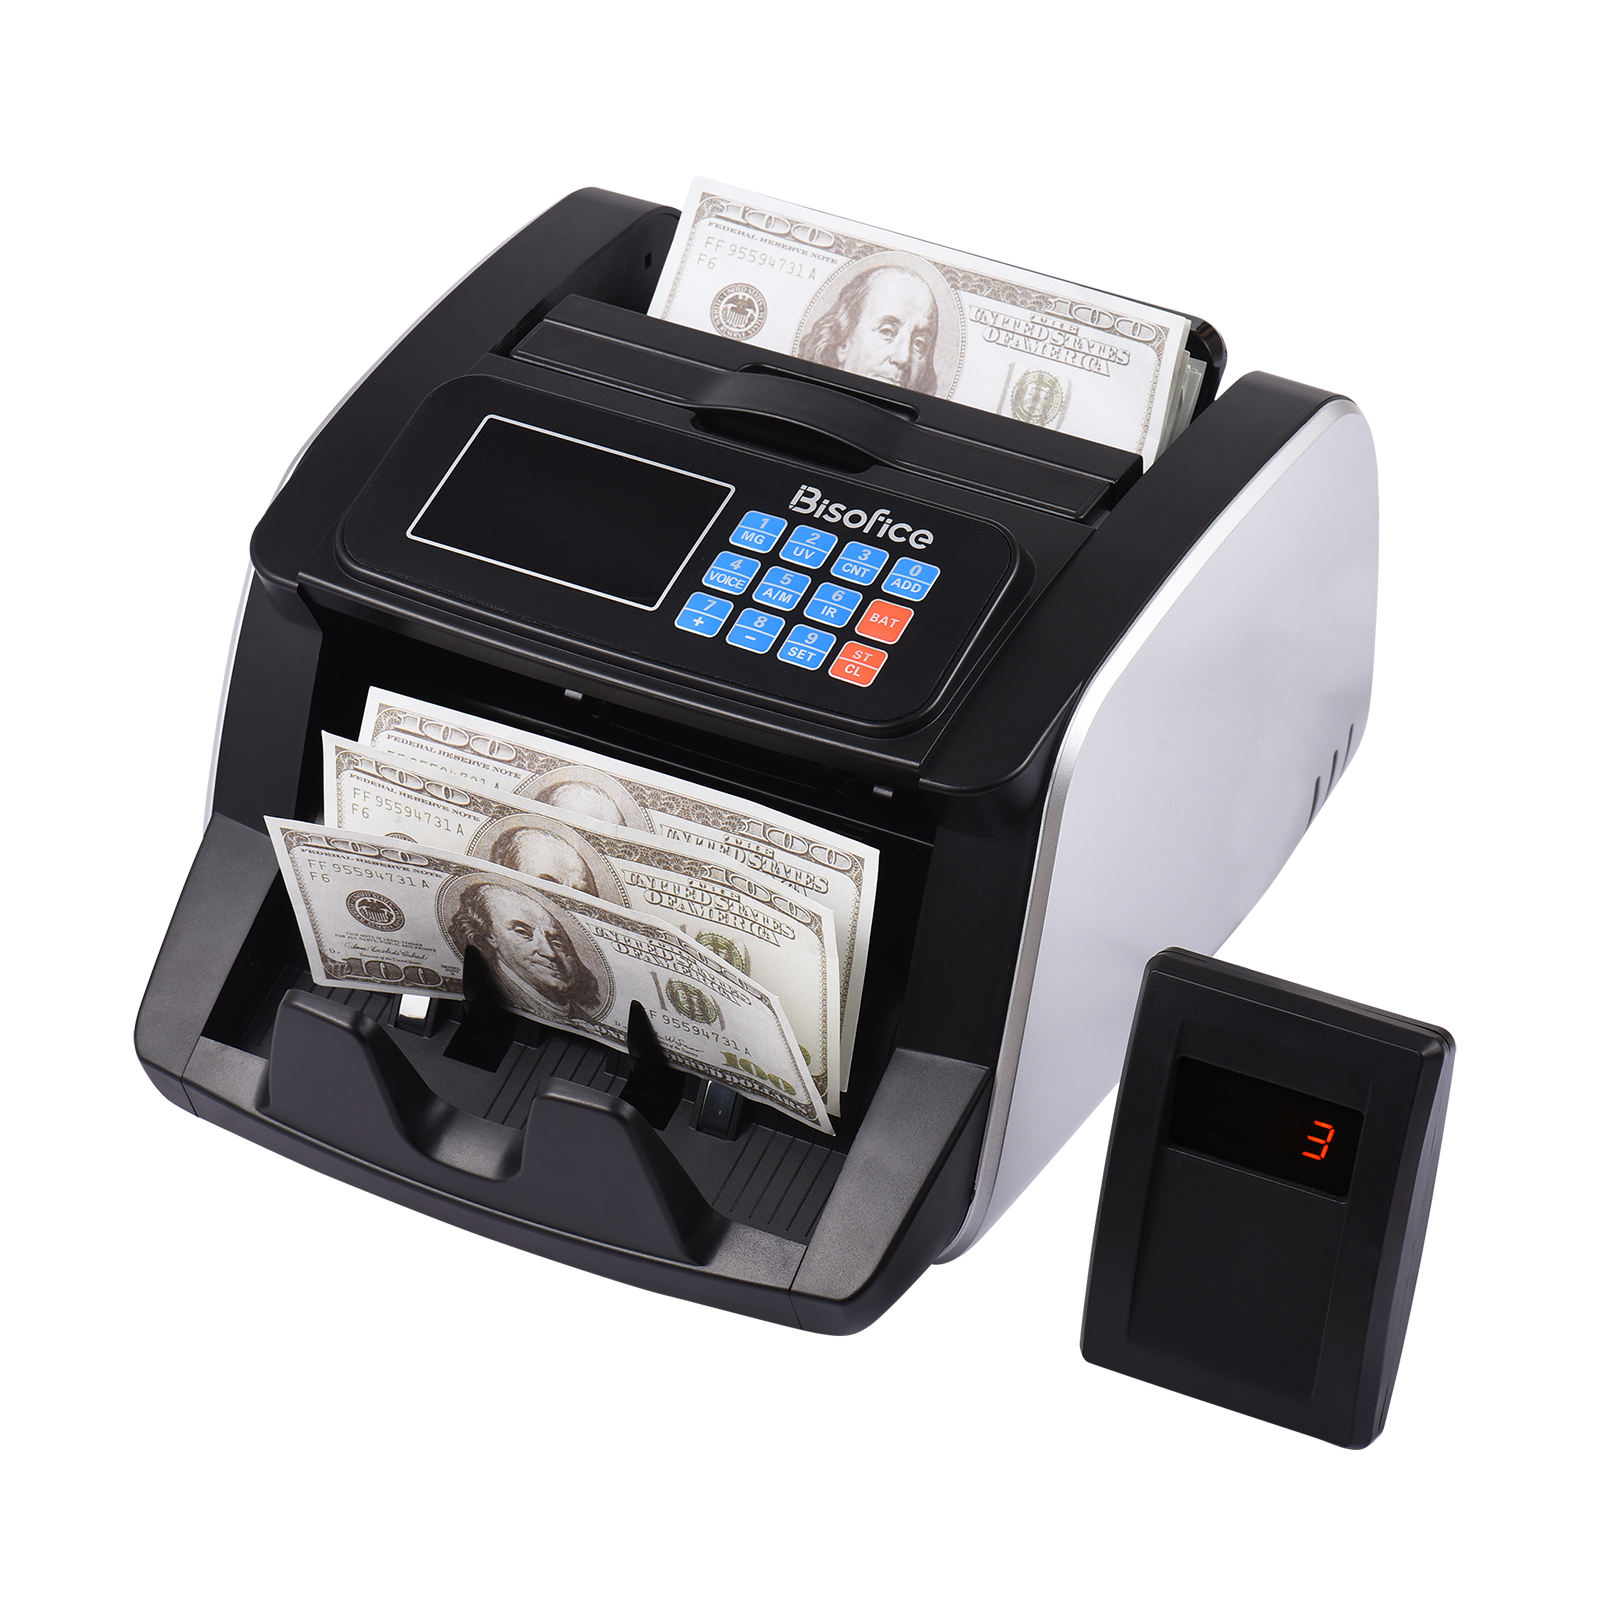 Bisofice Money Counter Machine Counterfeit Bill Detector Automatic Money Detection Top Loading Bill Counting Machine with UV MG IR for EURO US Dollar Add and Batch Modes Suitable for Shops Grocery Stores Restaurants Hotel Small Business - ShopShipShake